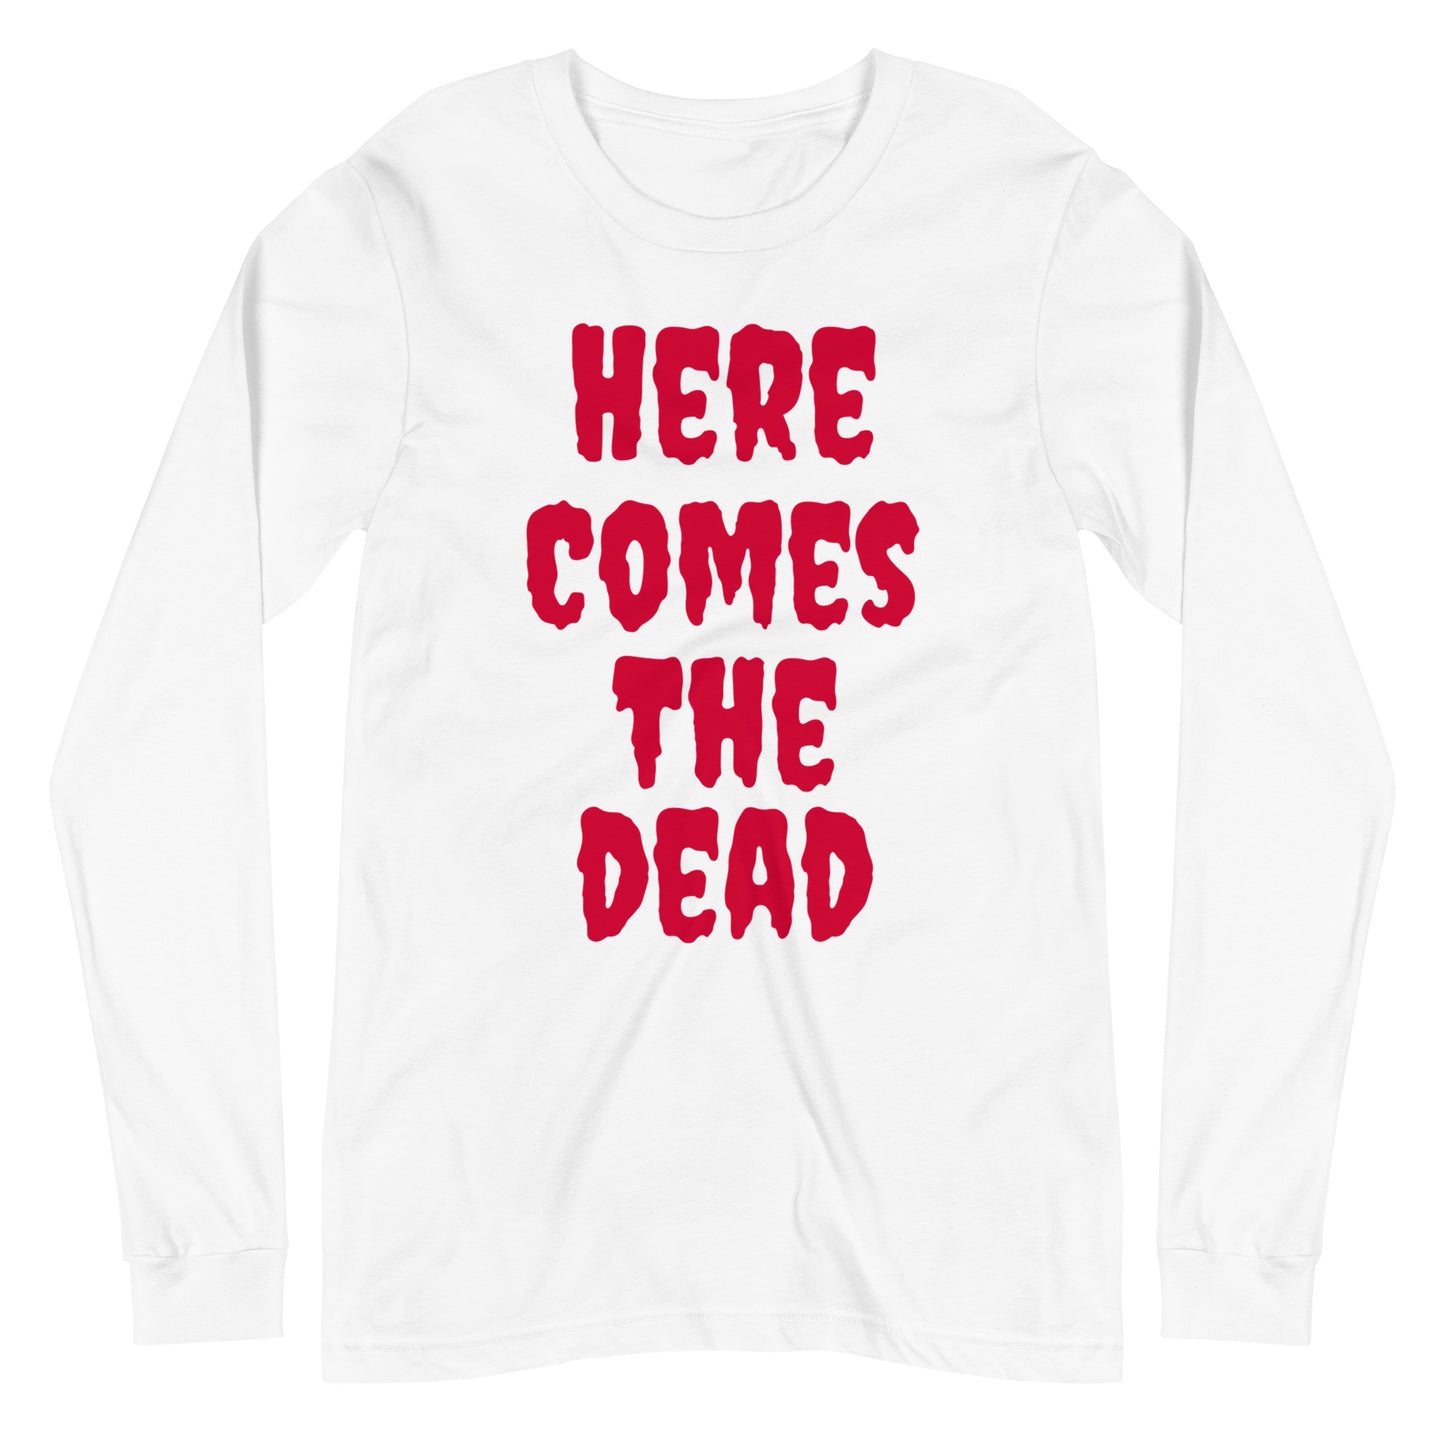 HERE COMES THE DEAD Unisex Long Sleeve Tee | rainandregret